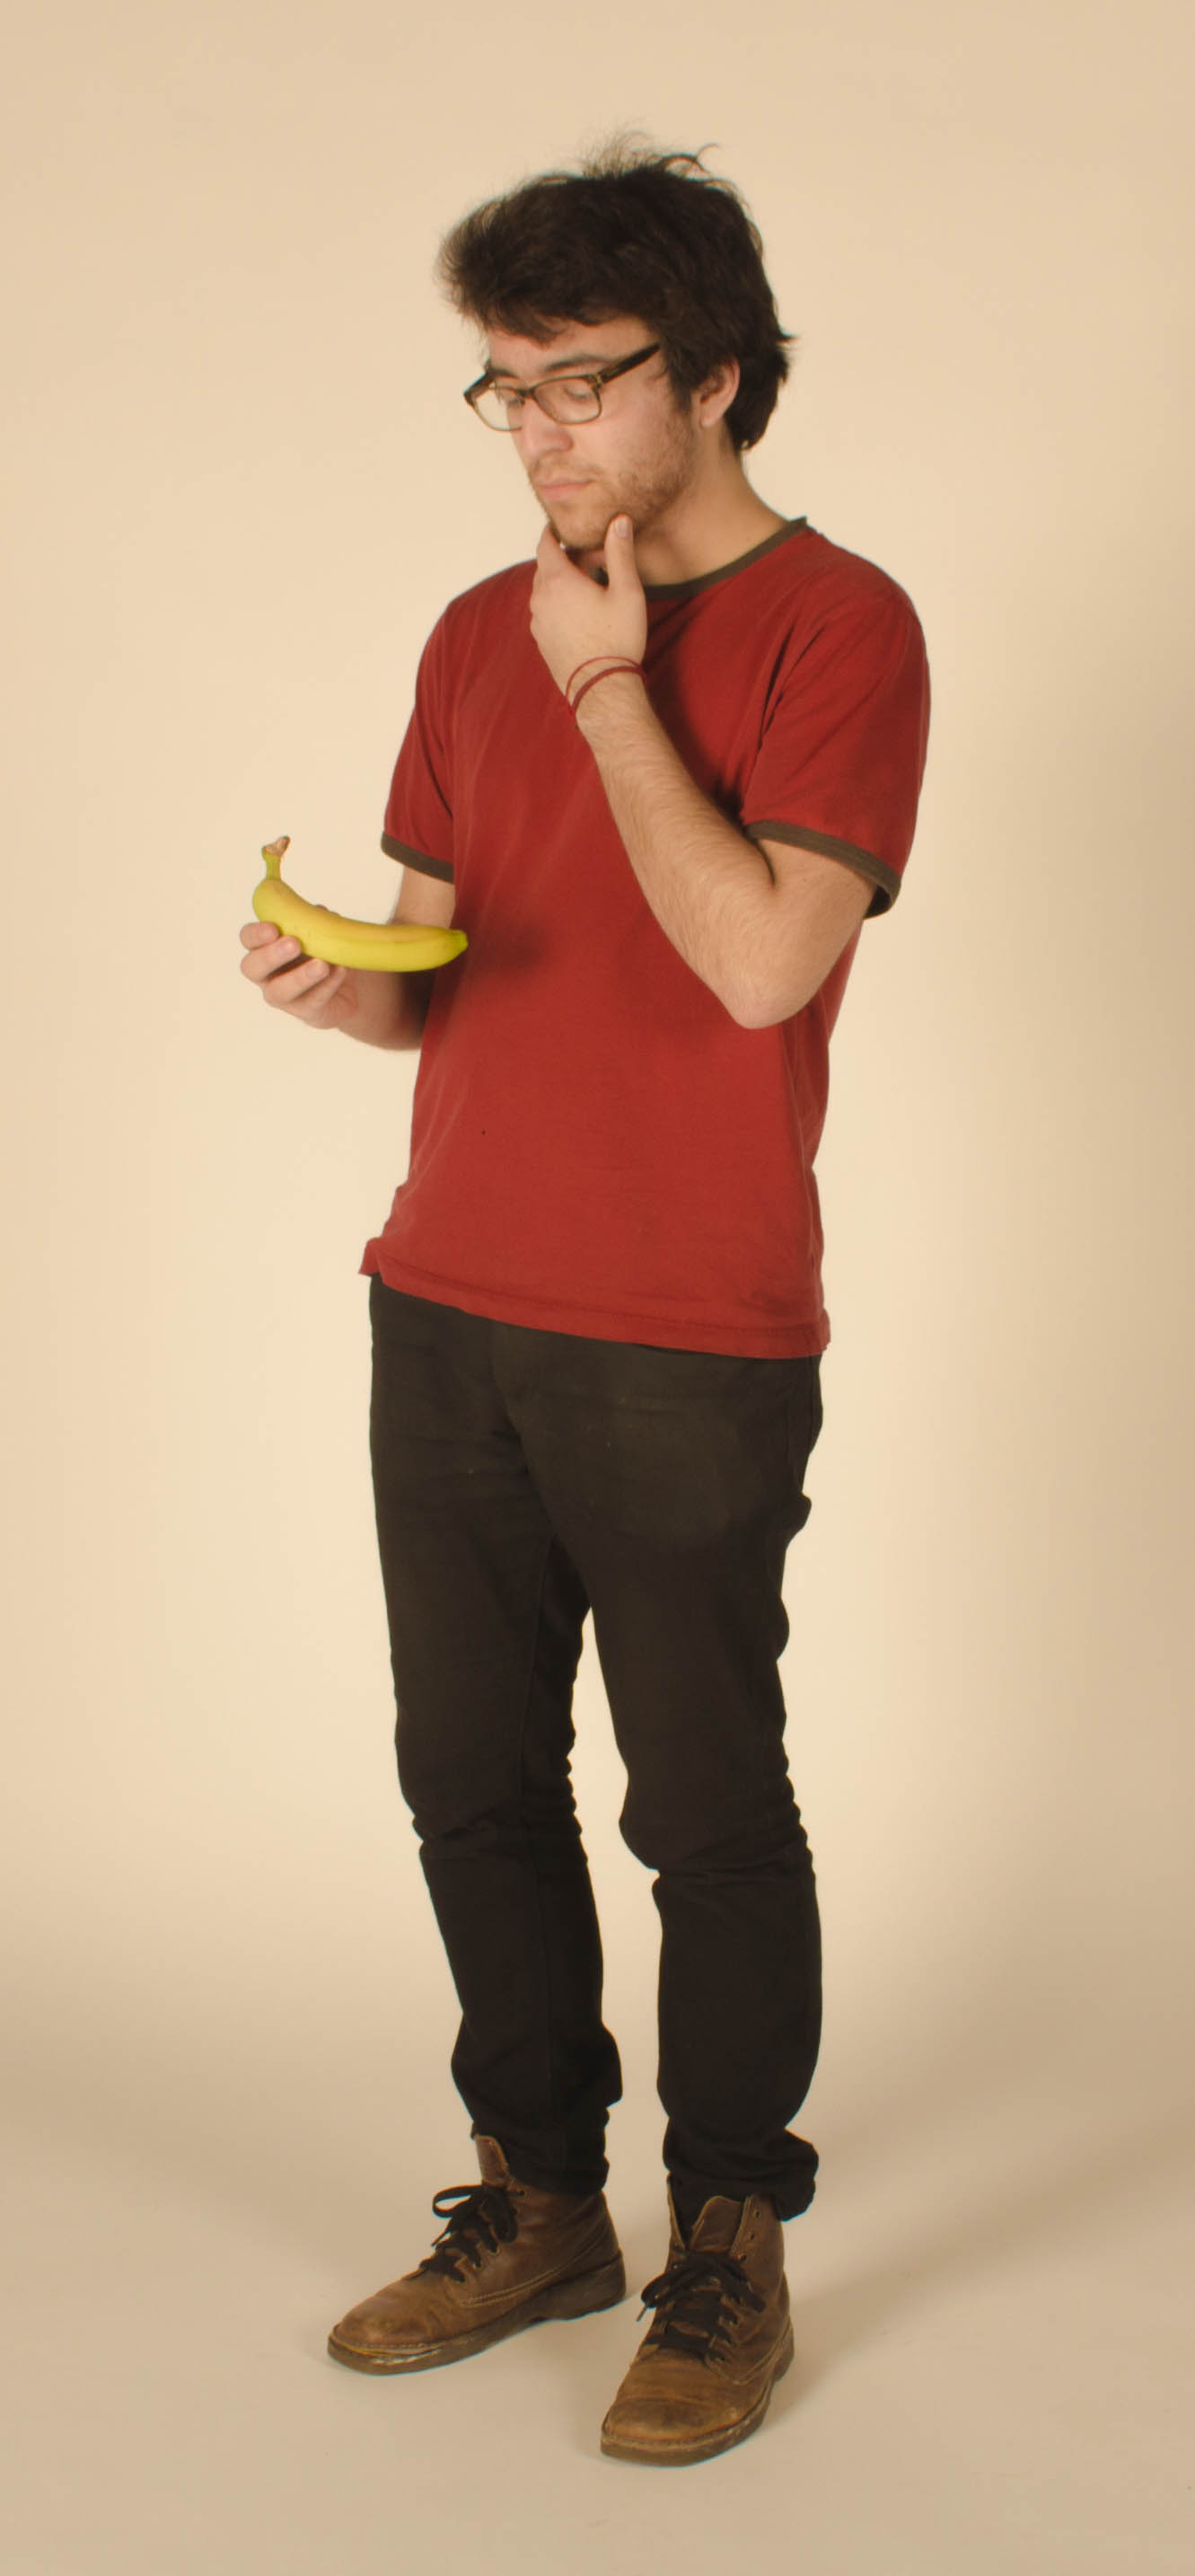 File:Young man observing a banana.jpg - Wikimedia Commons